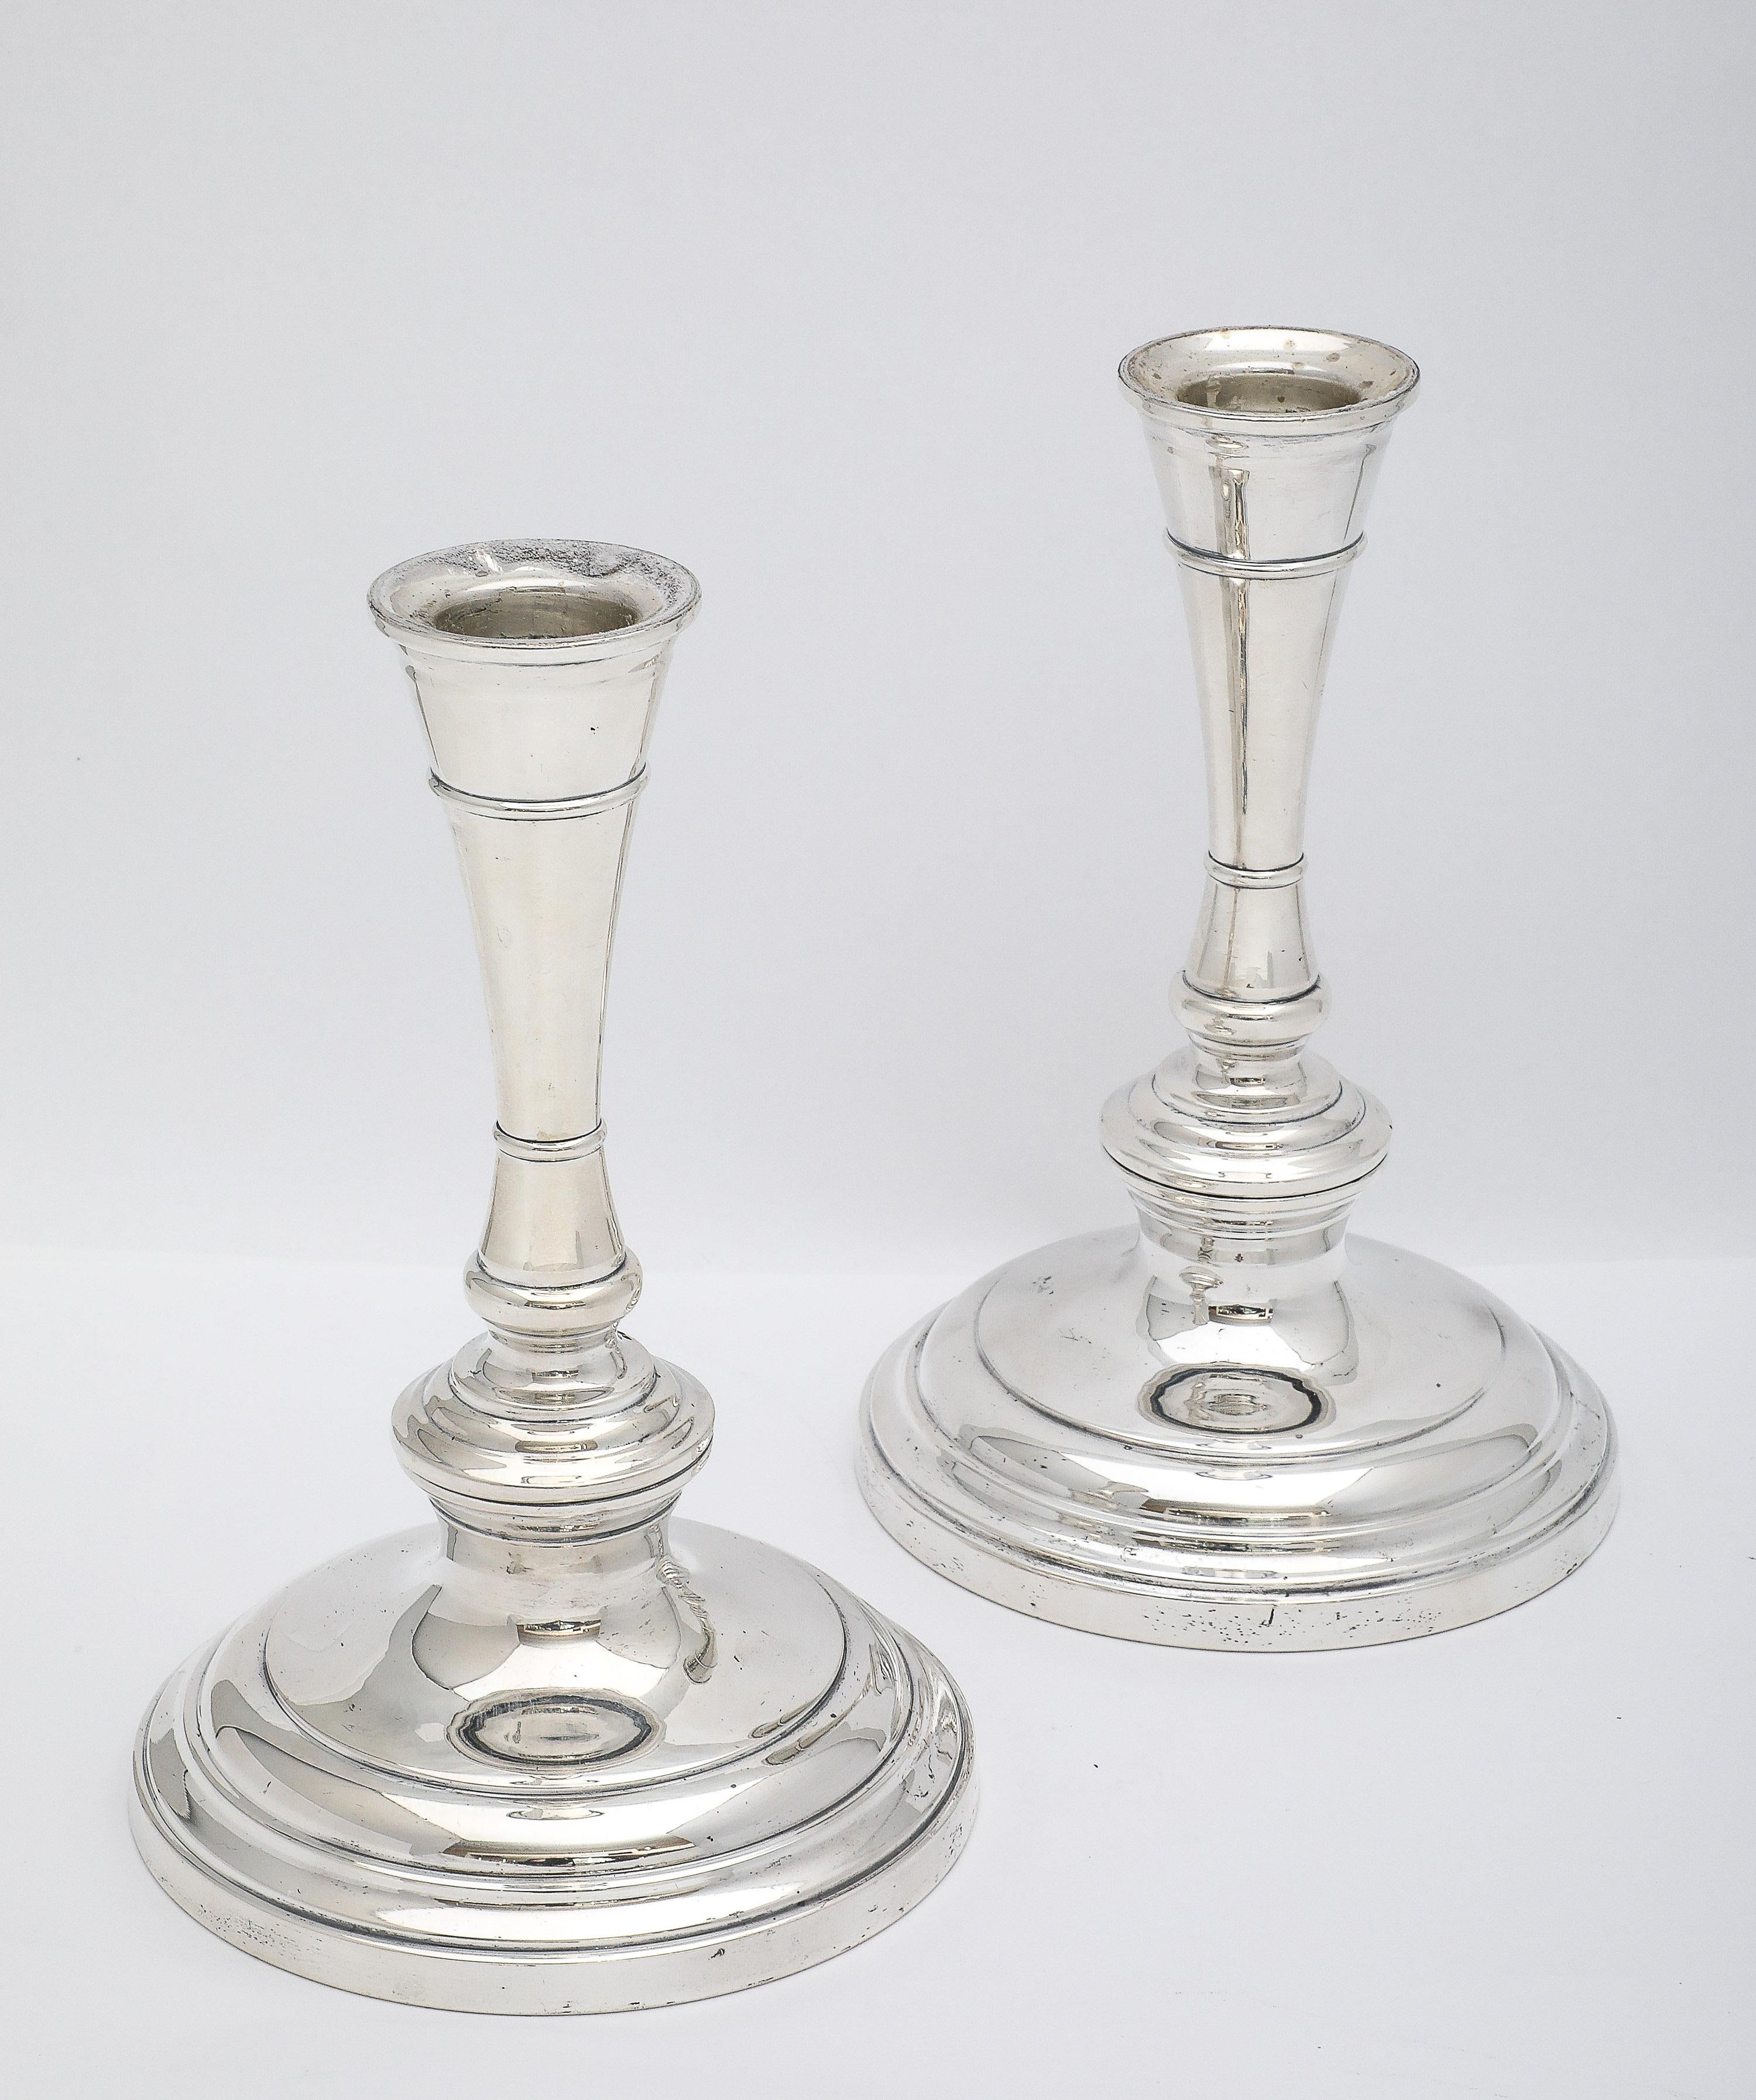  Tall Pair of Sterling Silver George III-Style Candlesticks - S. Kirk and Son For Sale 9